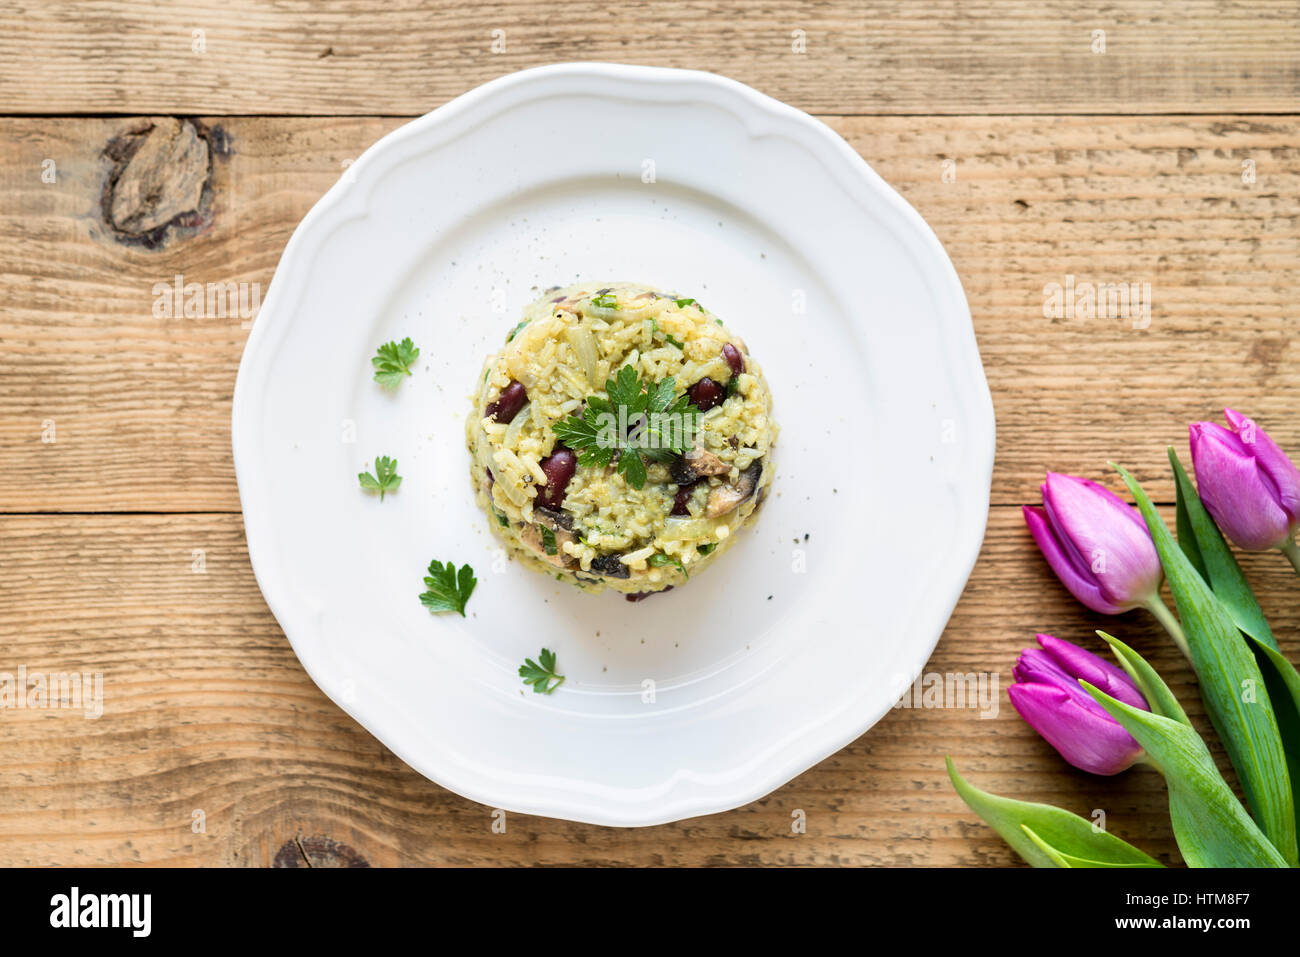 Top view of risotto (pilaf) with jasmine rice, red beans and vegetables on white plate on wooden rustic table Stock Photo